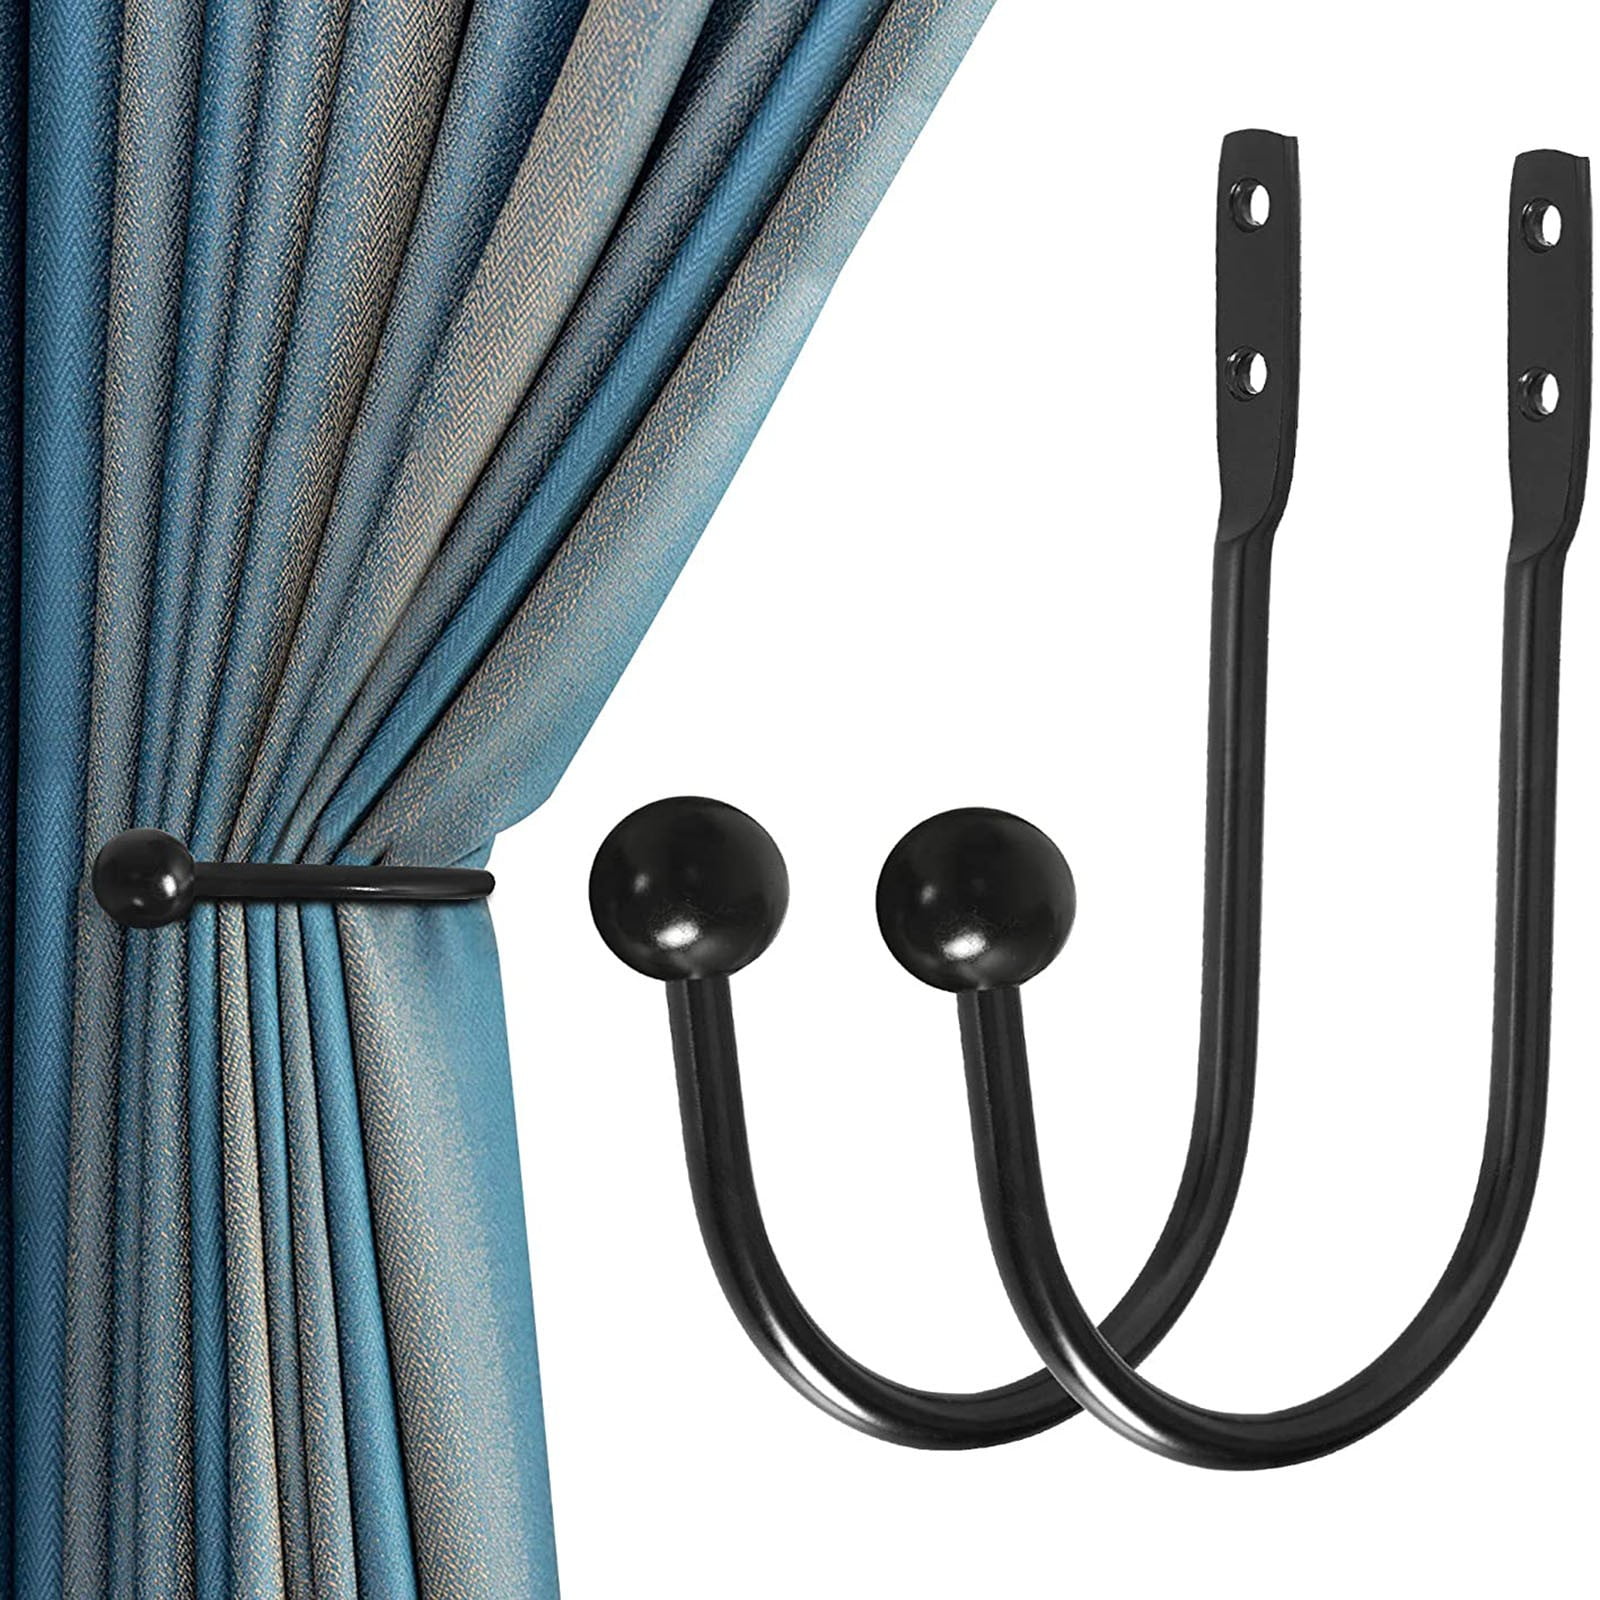 wofedyo hooks for hanging curtain hooks, 2 wall-mounted curtain tie screws,  heavy metals decorative window curtain hooks wall decor black 18*17*2 